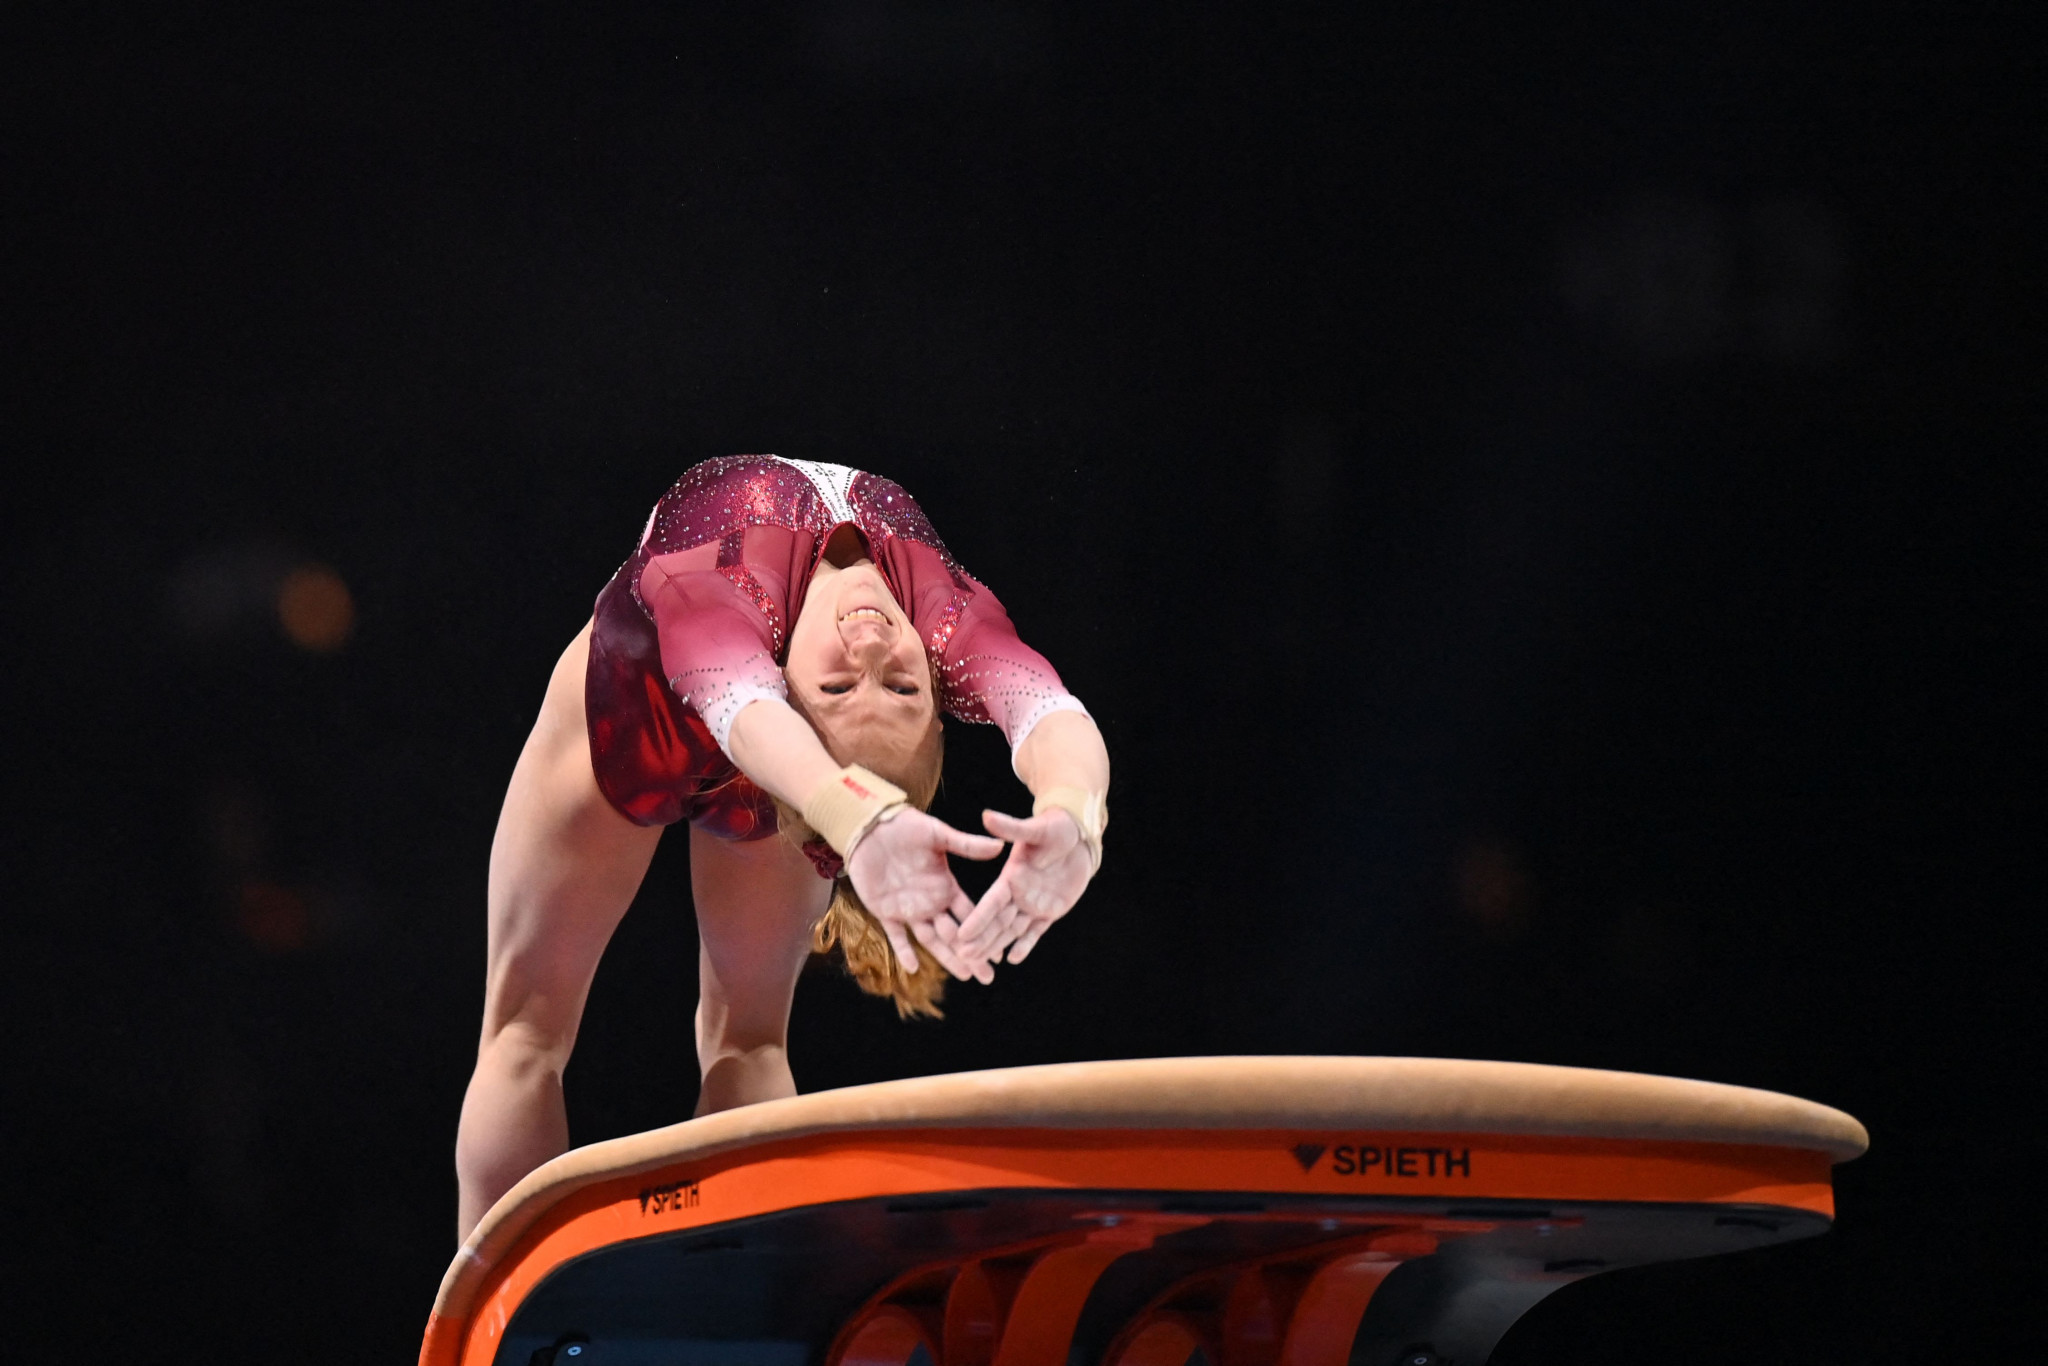 Olympic gold medallist Viktoriia Listunova of the Russian Gymnastics Federation top scored in women's vault and uneven bars qualifying in Doha ©Getty Images